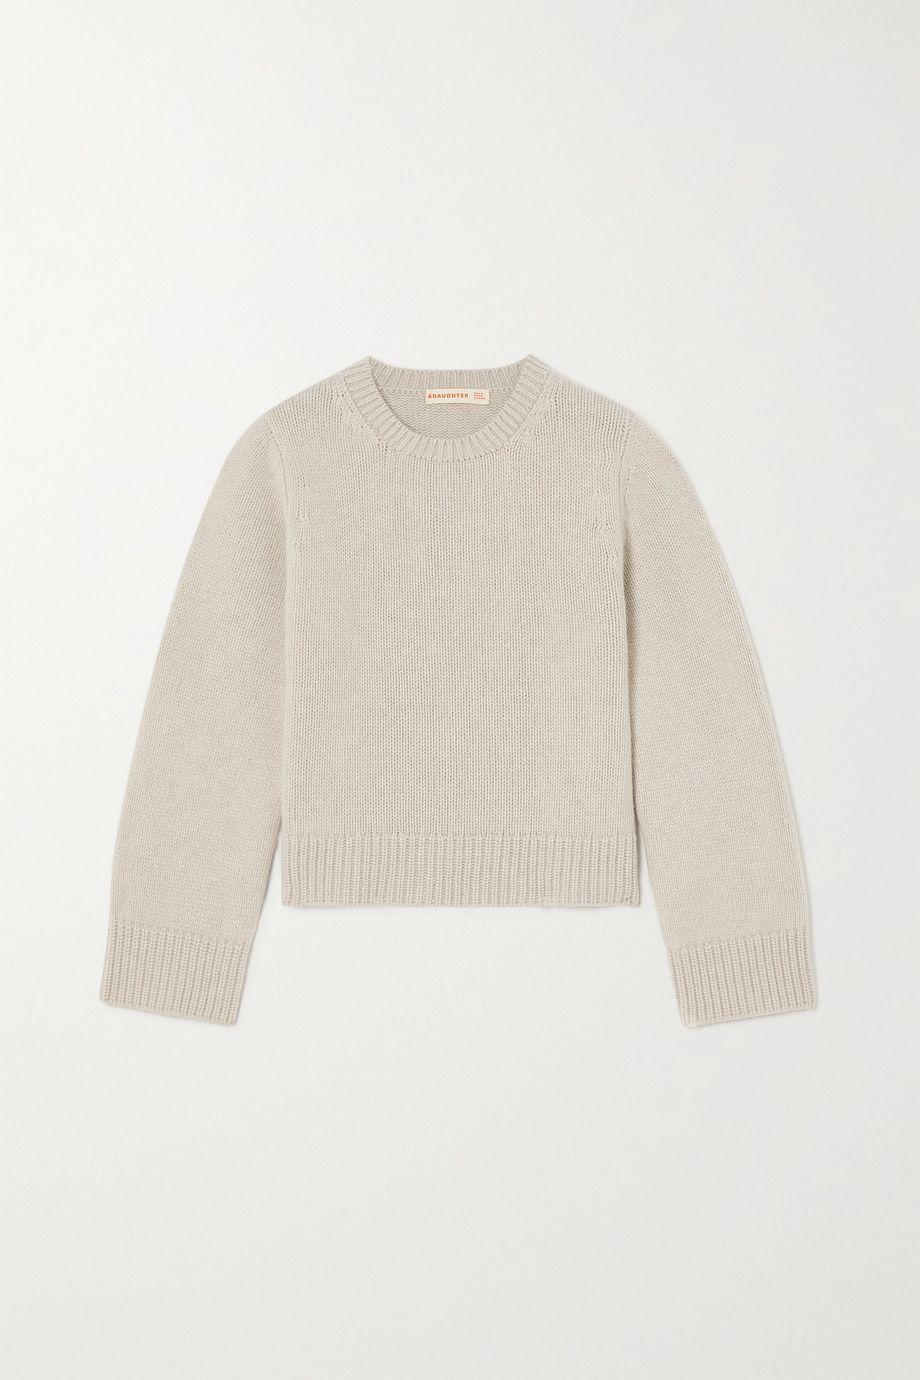 Merino wool and cashmere-blend sweater by &DAUGHTER